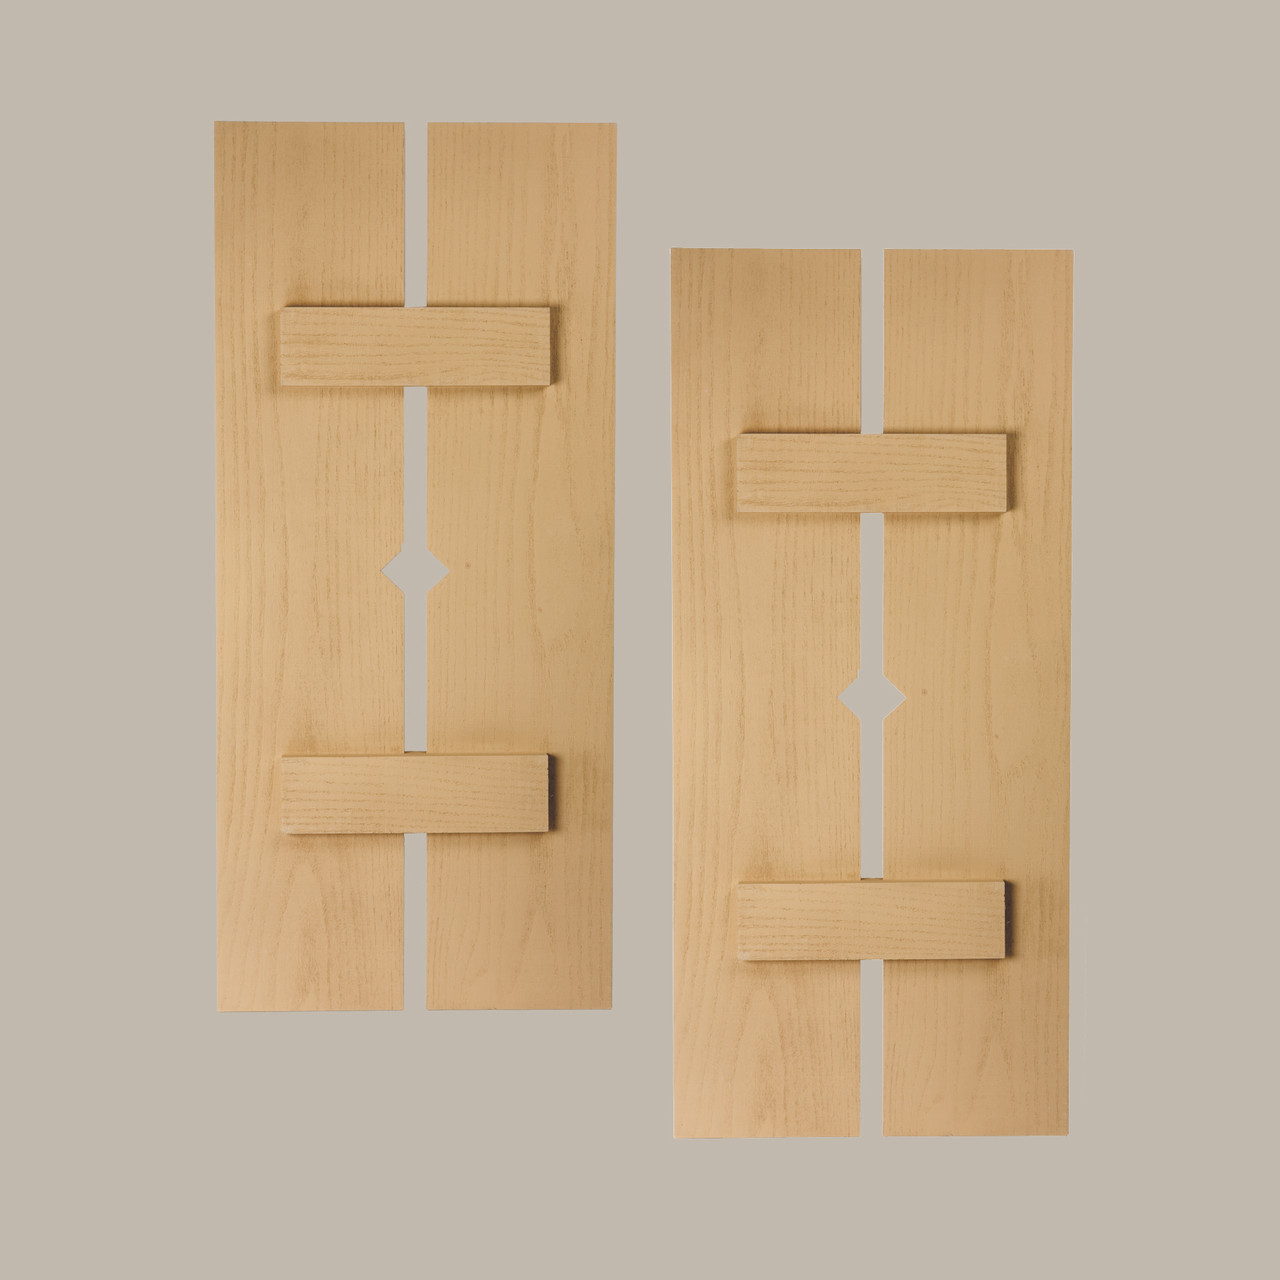 12 inch by 115 inch Plank Shutter with 2-Plank, Diamond